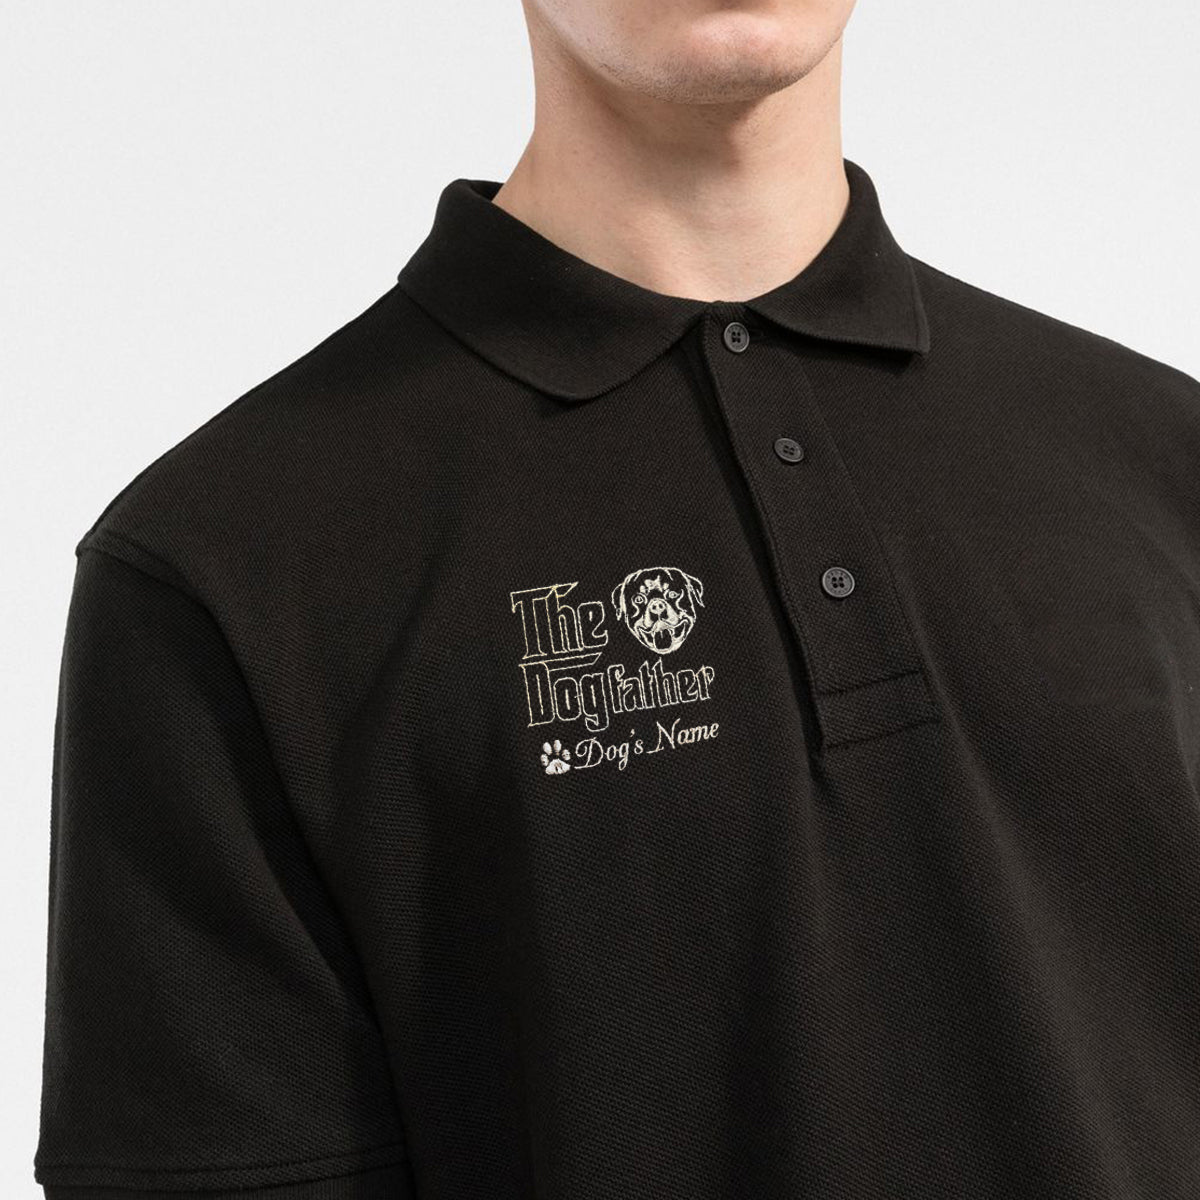 Personalized Rottweiler Polo Shirt, Embroidered with Dog Name, The DogFather Design, Unique Gift For Rottweiler Lovers